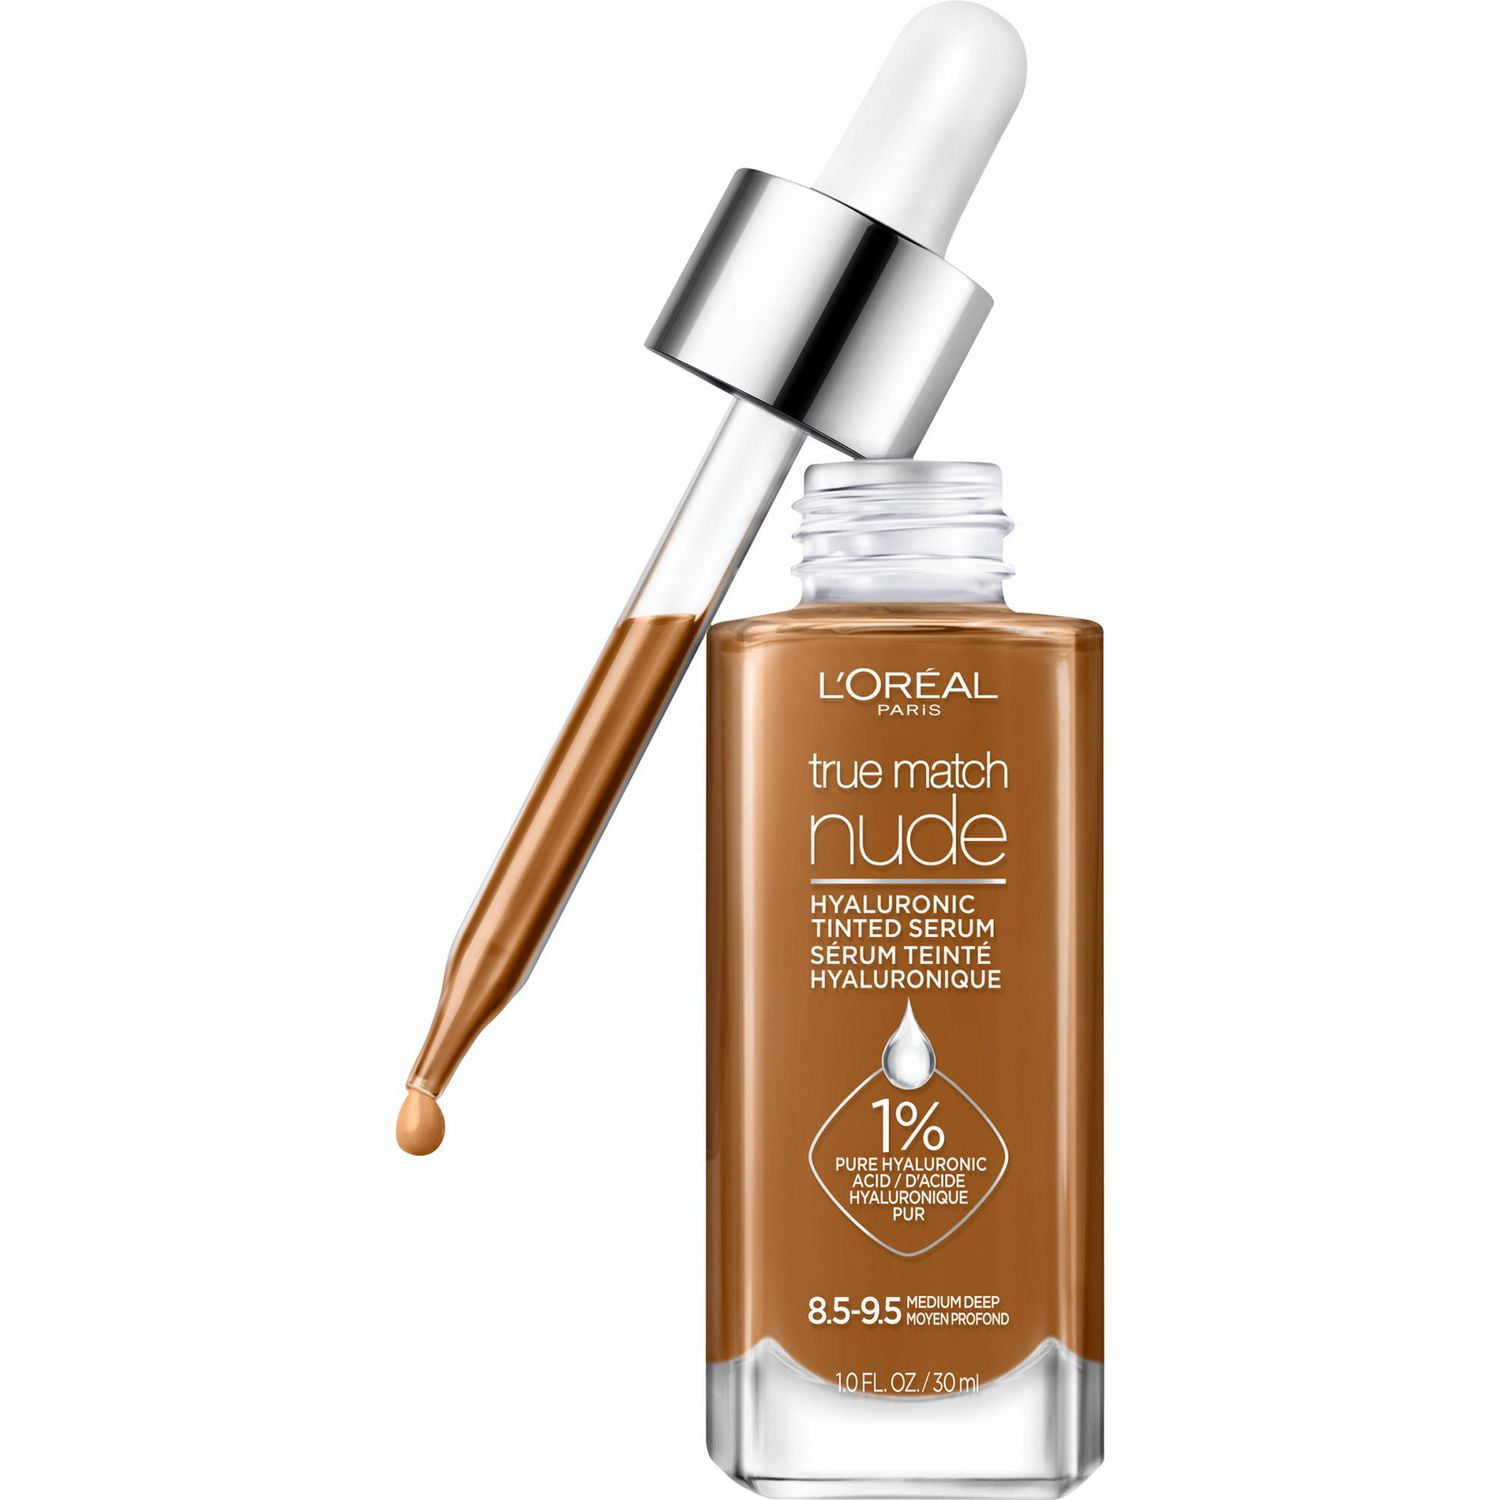 L'Oréal Paris True Match Nude Tinted Serum with 1% Hyaluronic Acid,  Hyaluronic Acid Infused 